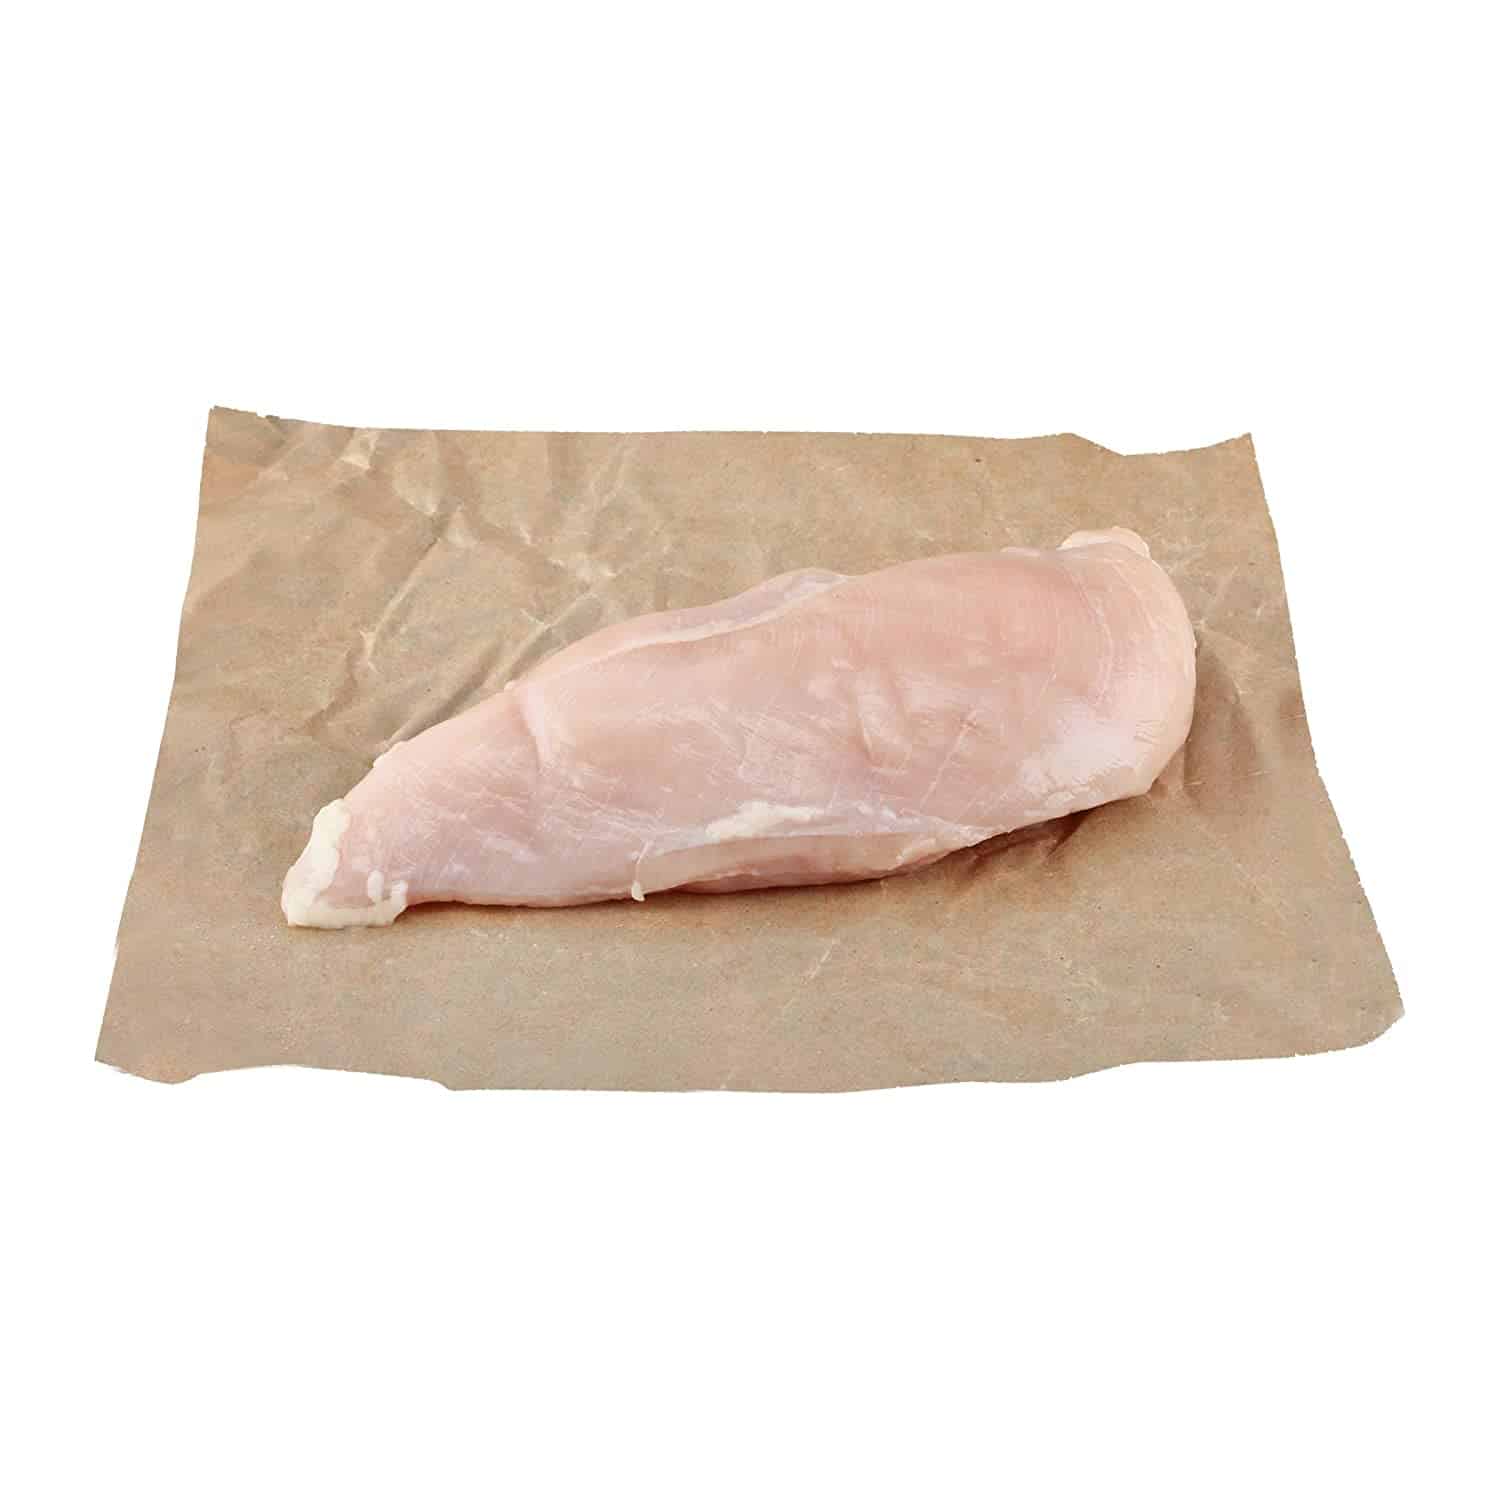 Oasis Fresh Bell &amp; Evans, Chicken Breast Boneless Skinless Air Chilled Tray Pack Step 2 Per Lb.